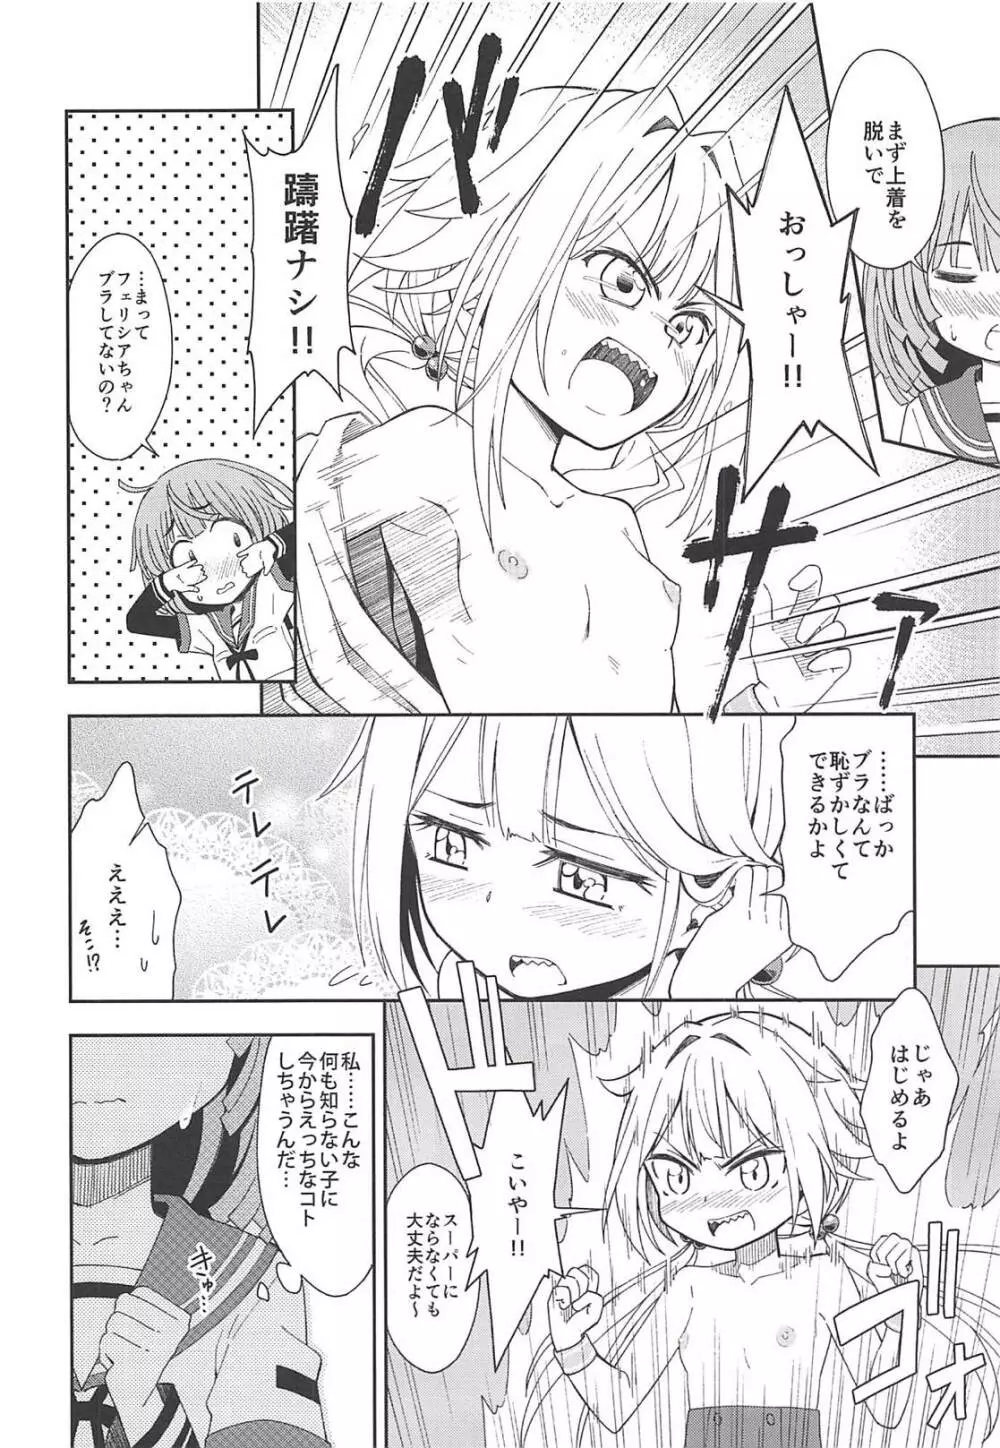 Lovely Girls' Lily Vol.17 - page7